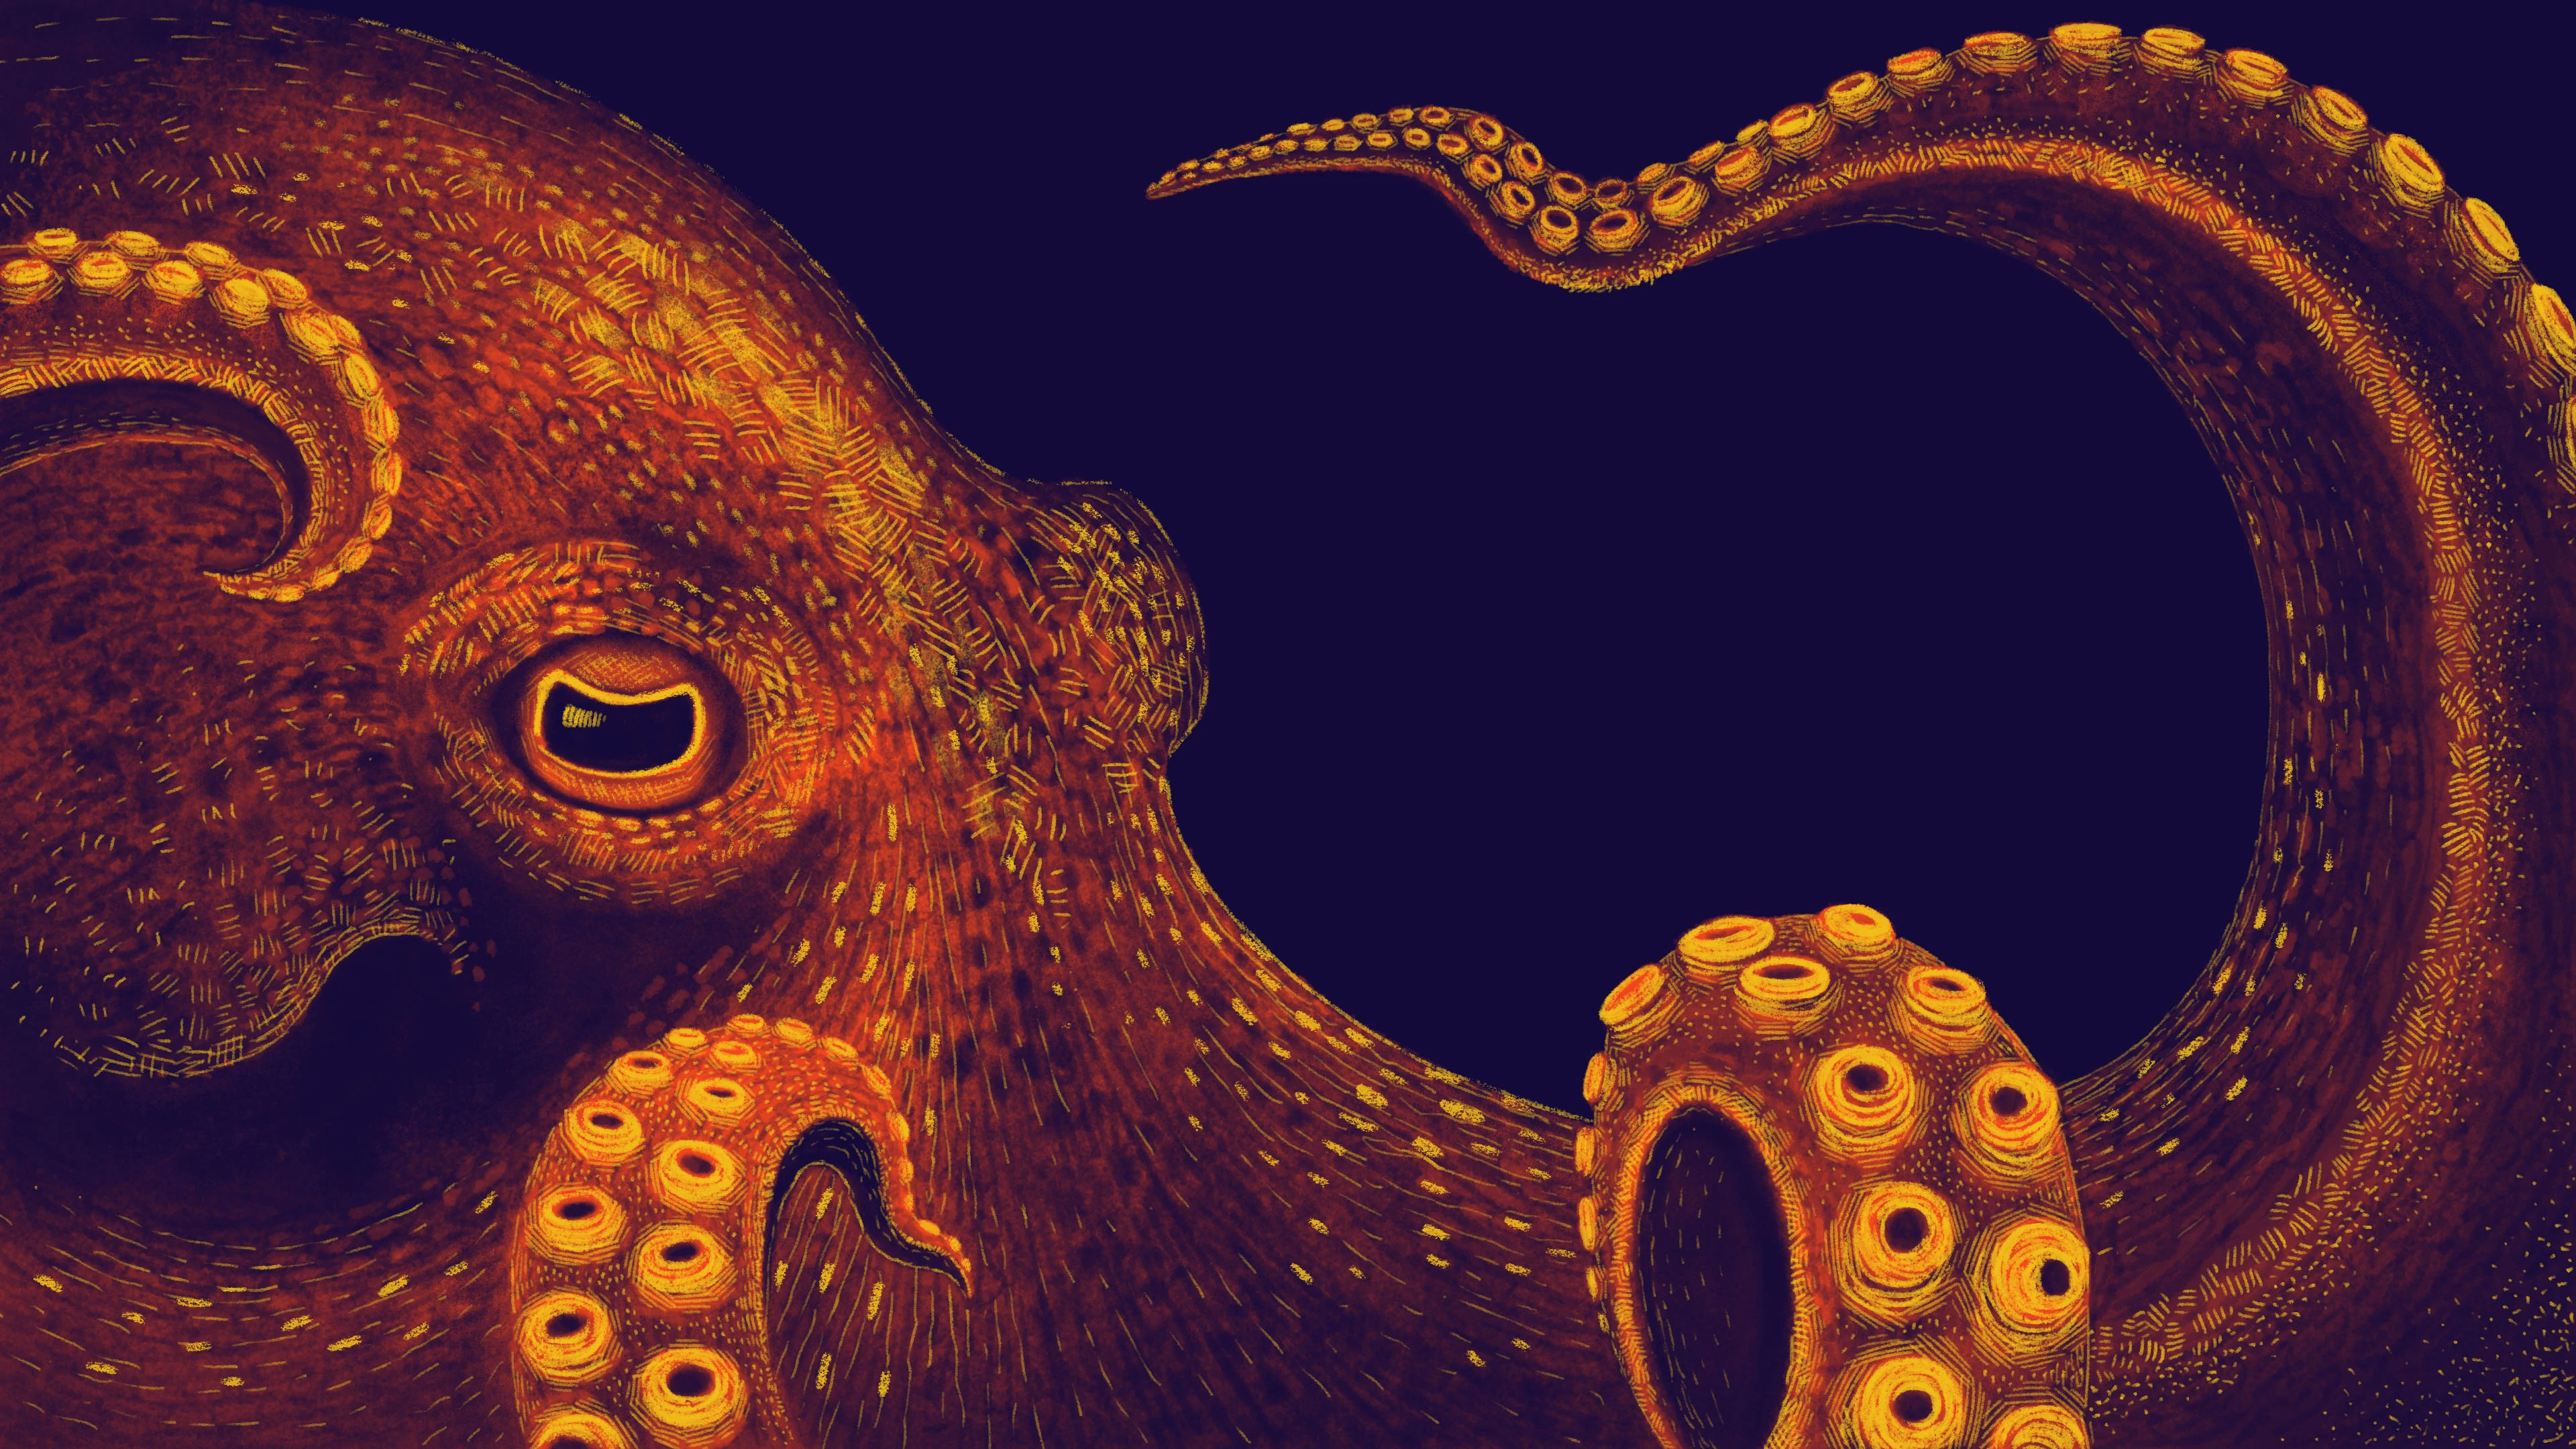 Cephalopod week movie nights, City-based events, Educational and entertaining, Discover the wonders of the octopus, 3840x2160 4K Desktop